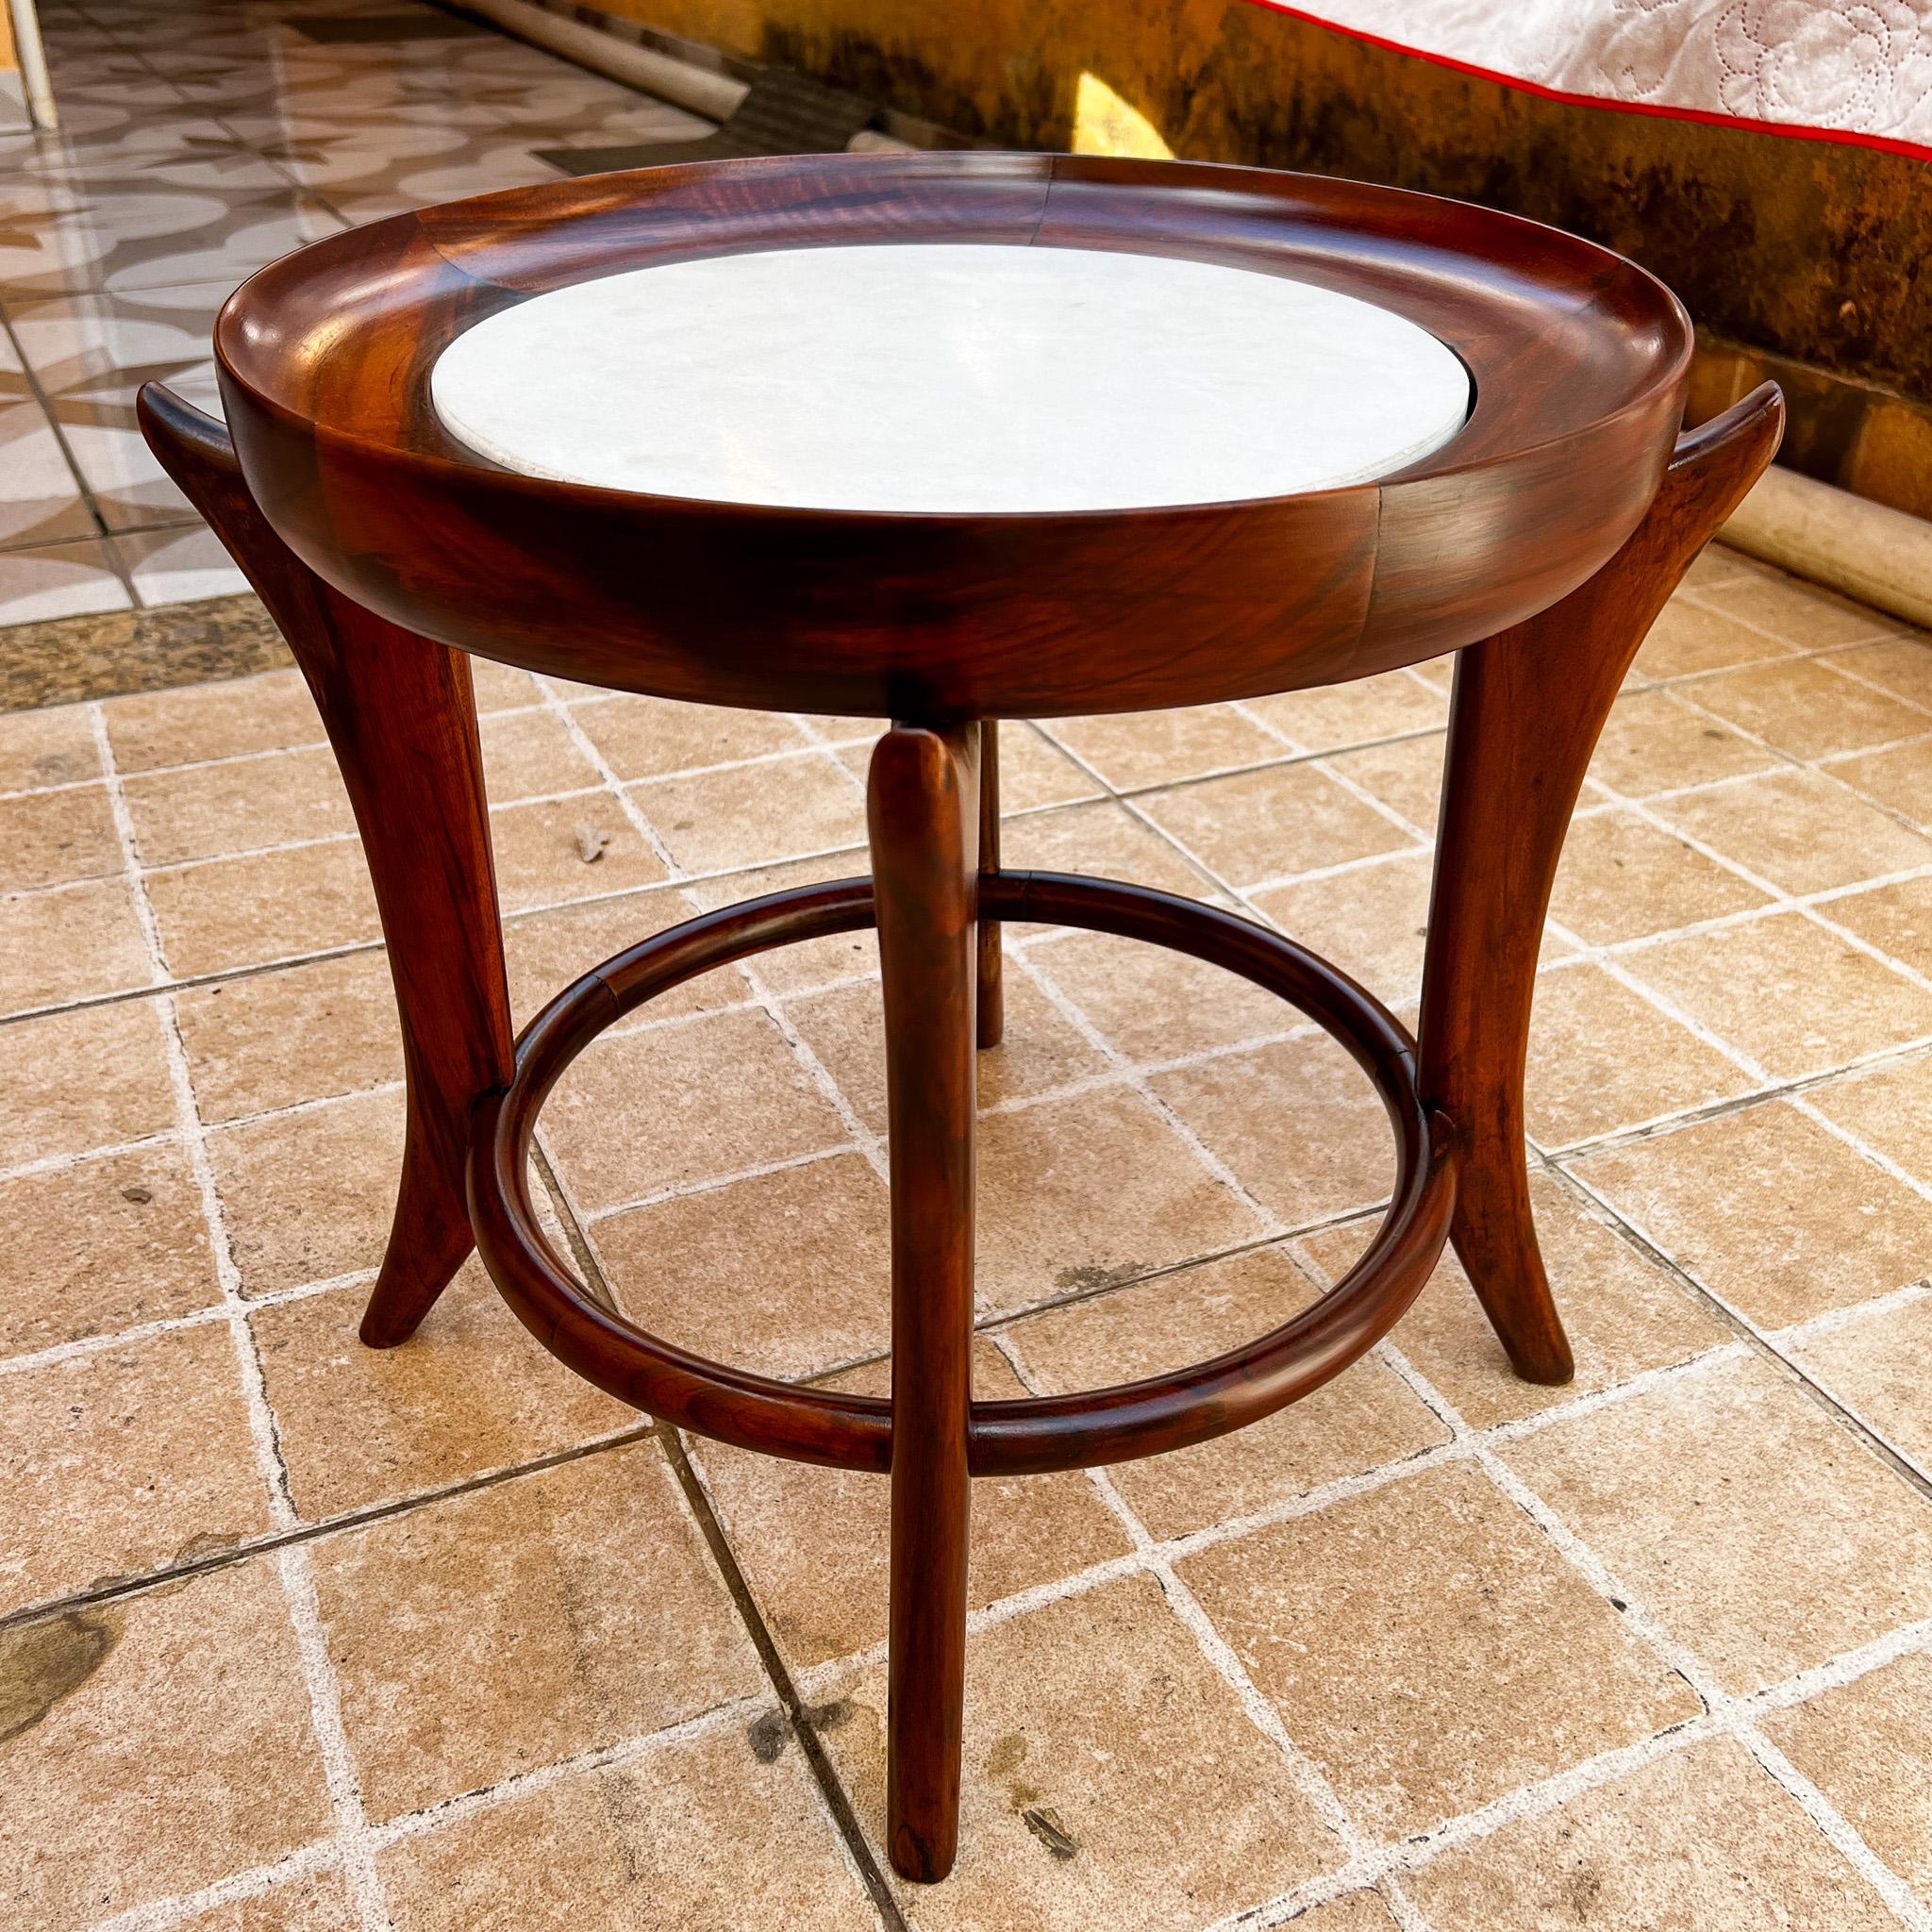 20th Century Midcentury Modern Side Table in Hardwood & Marble by Giuseppe Scapinelli, 1950's